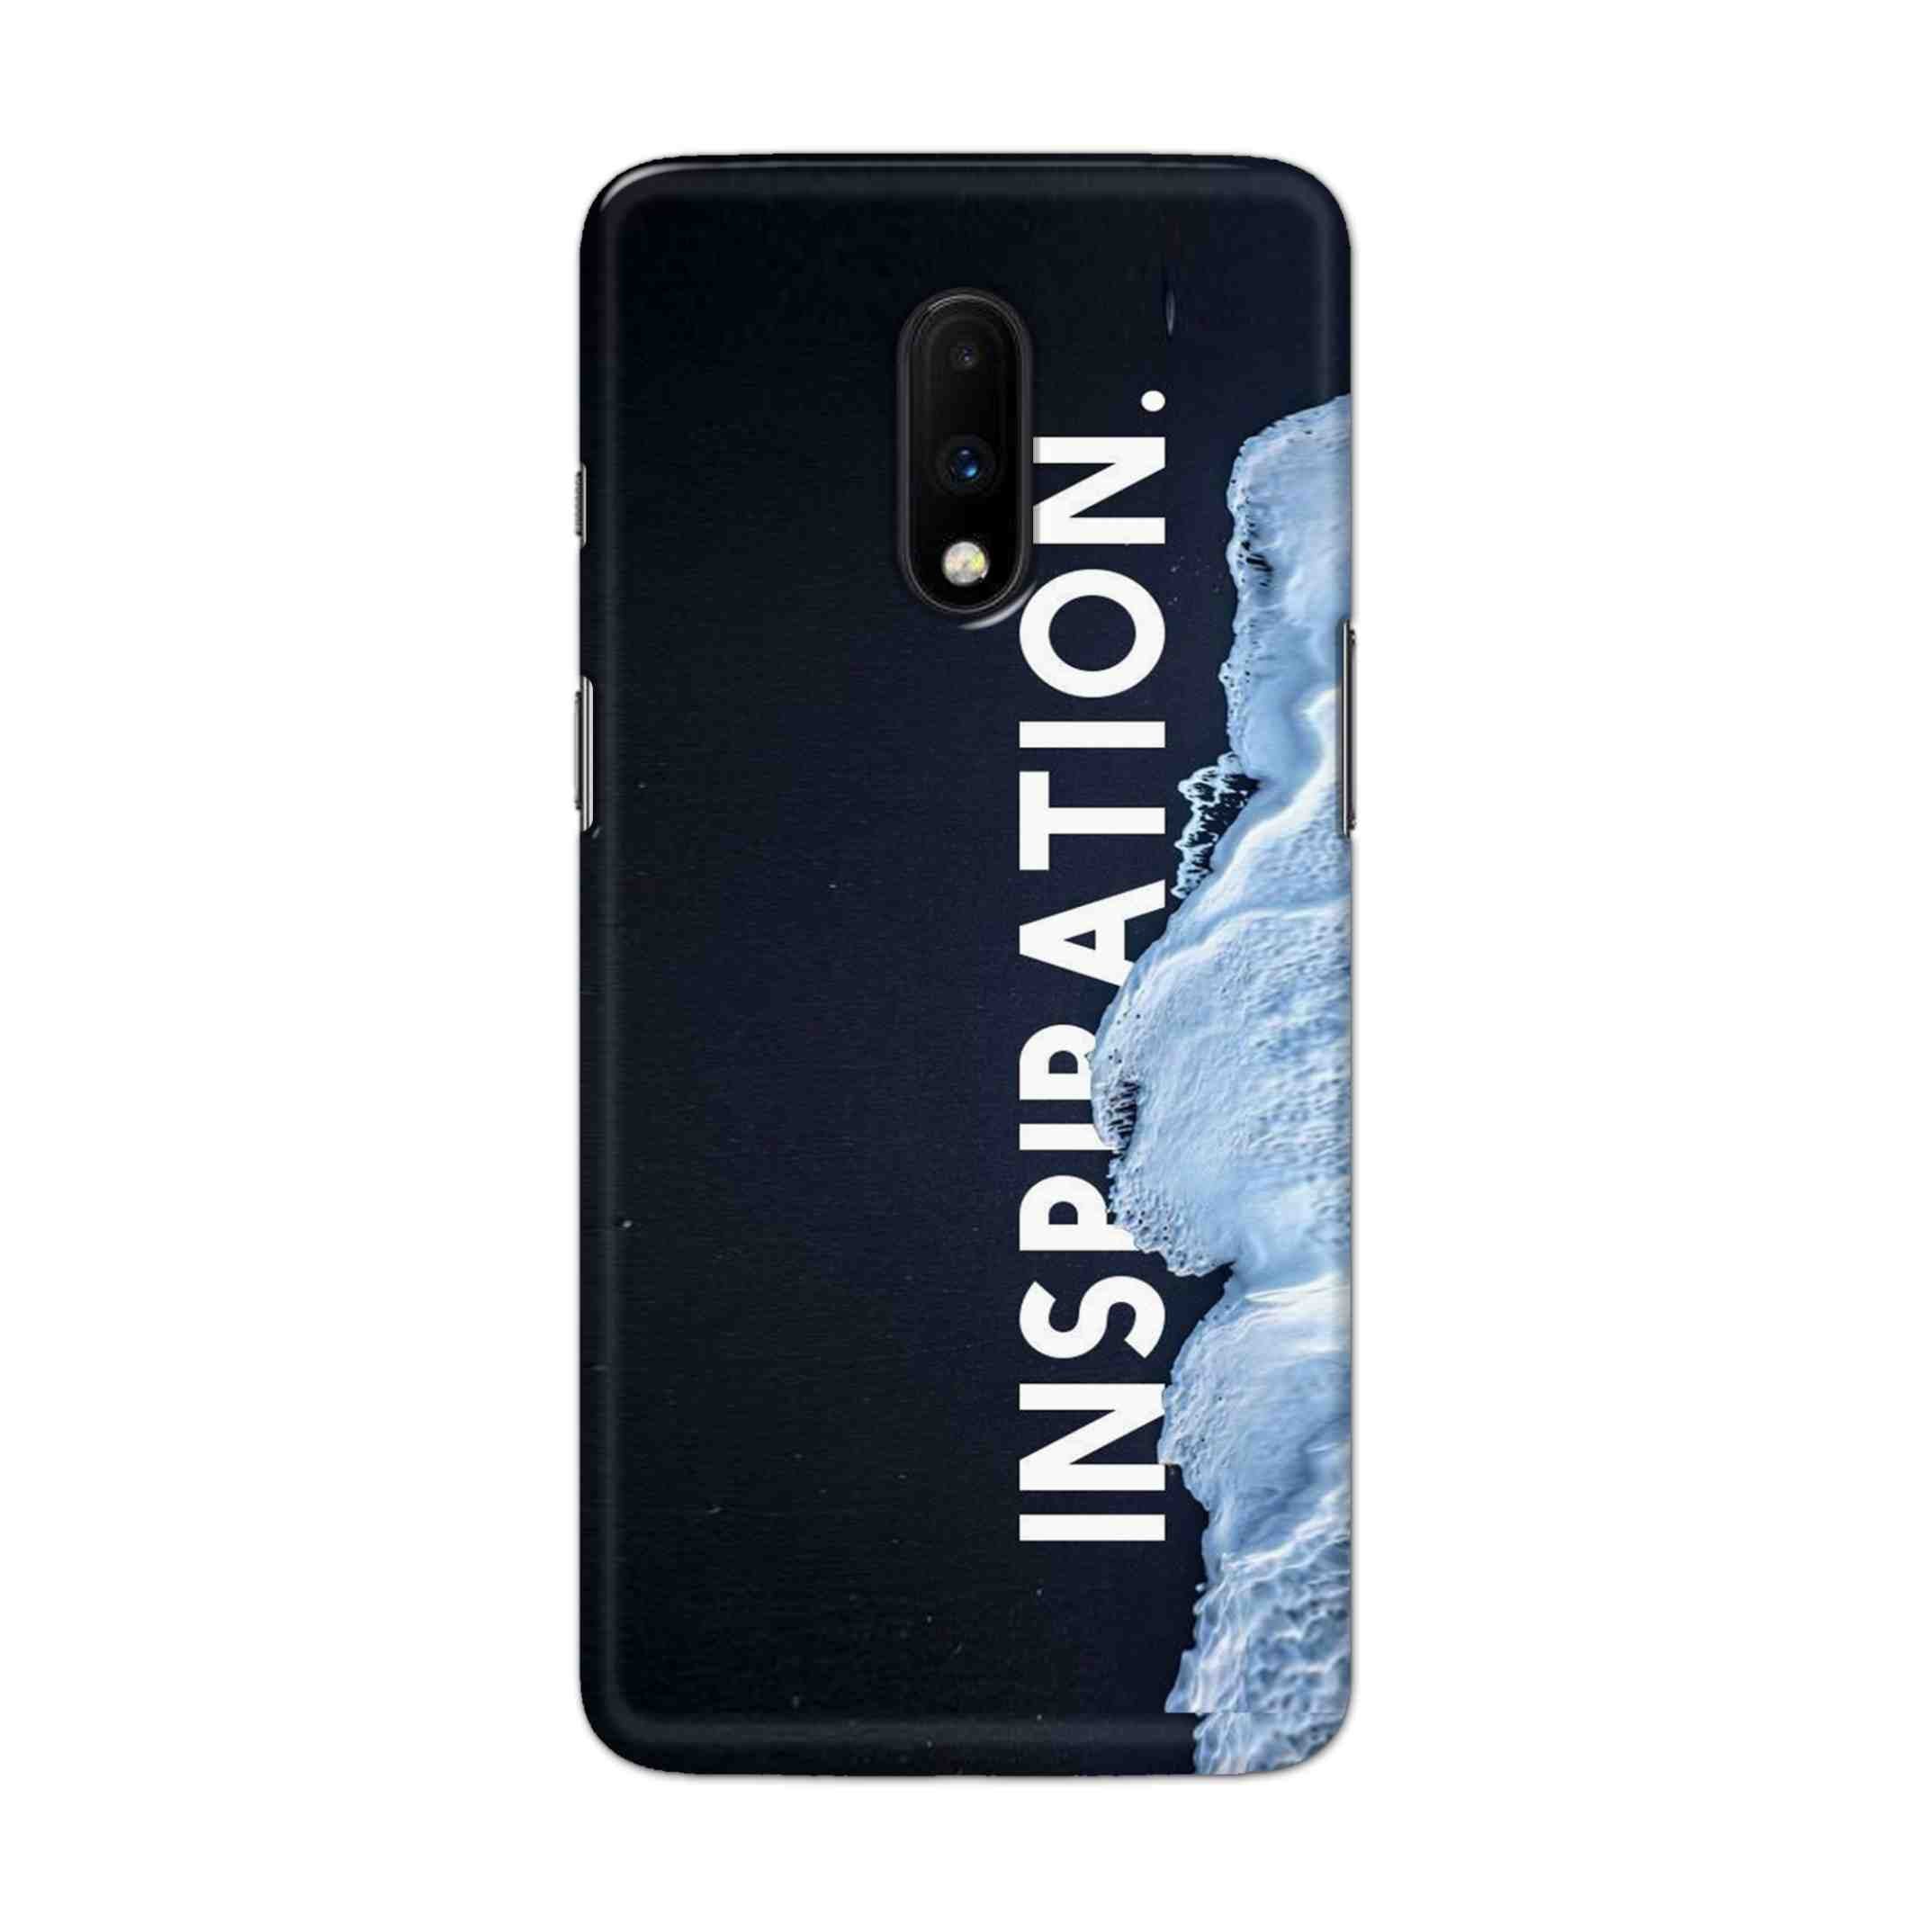 Buy Inspiration Hard Back Mobile Phone Case Cover For OnePlus 7 Online